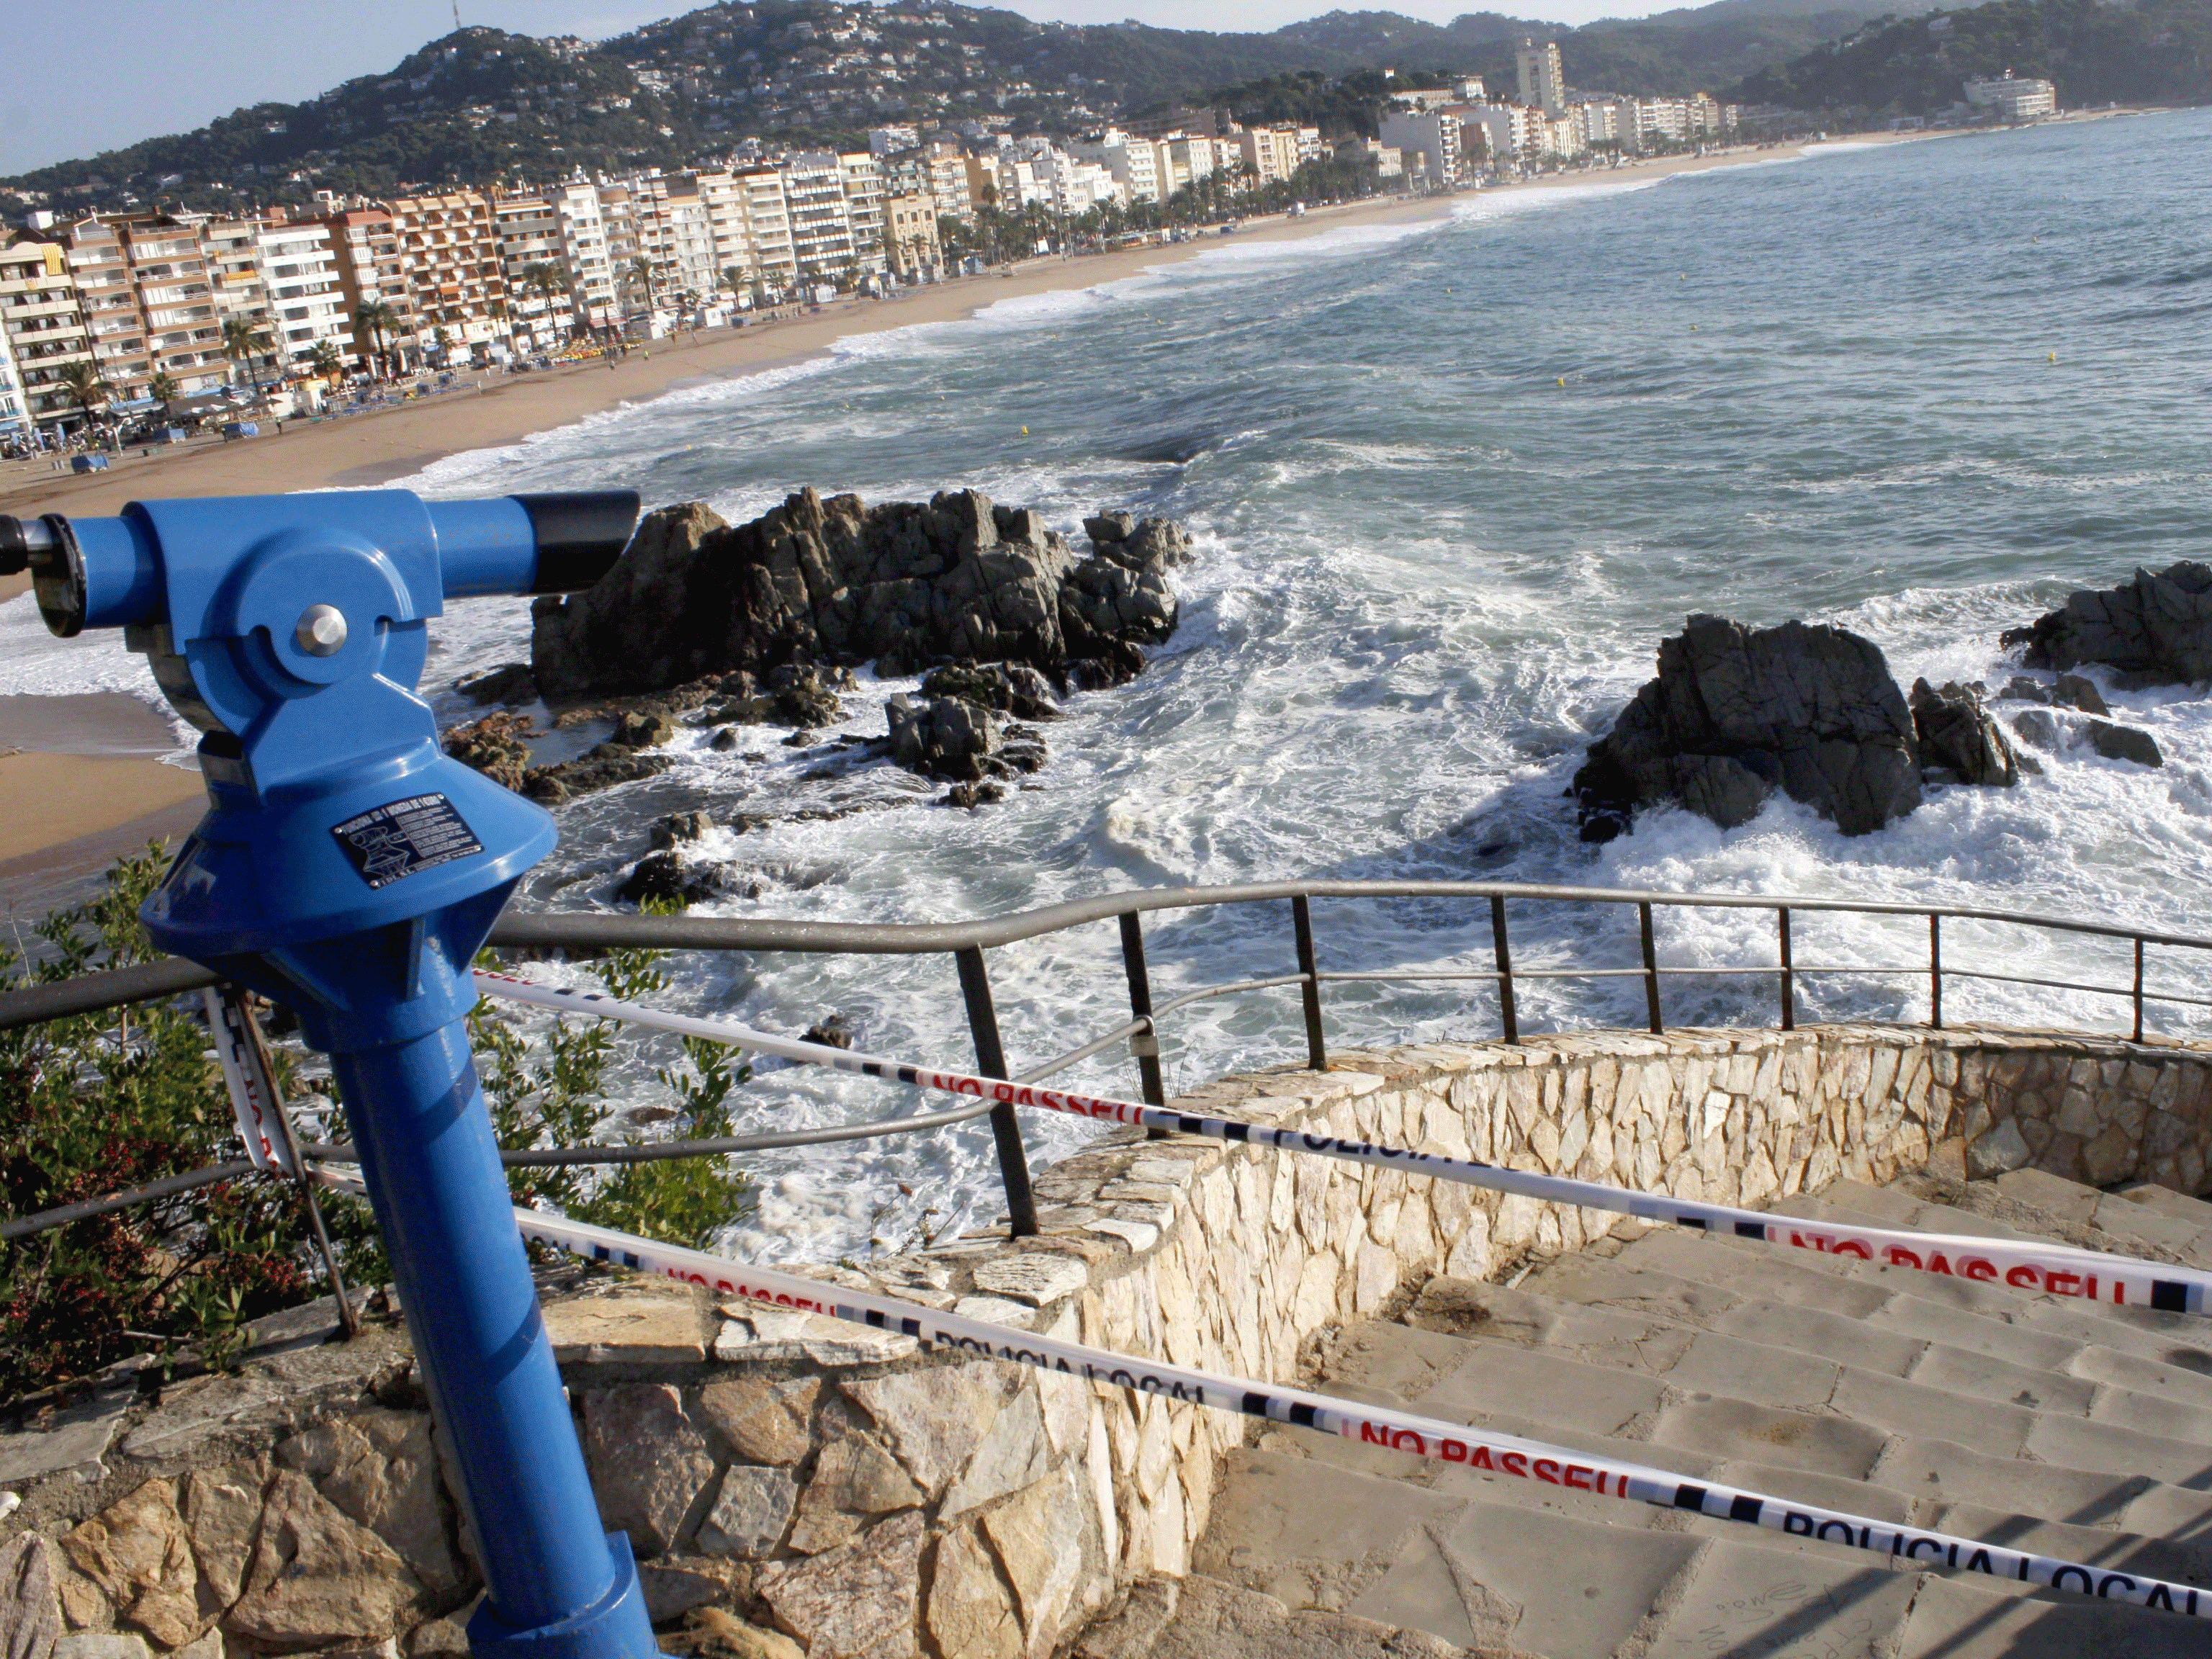 The beach of Lloret de Mar where the drowned bodies were found